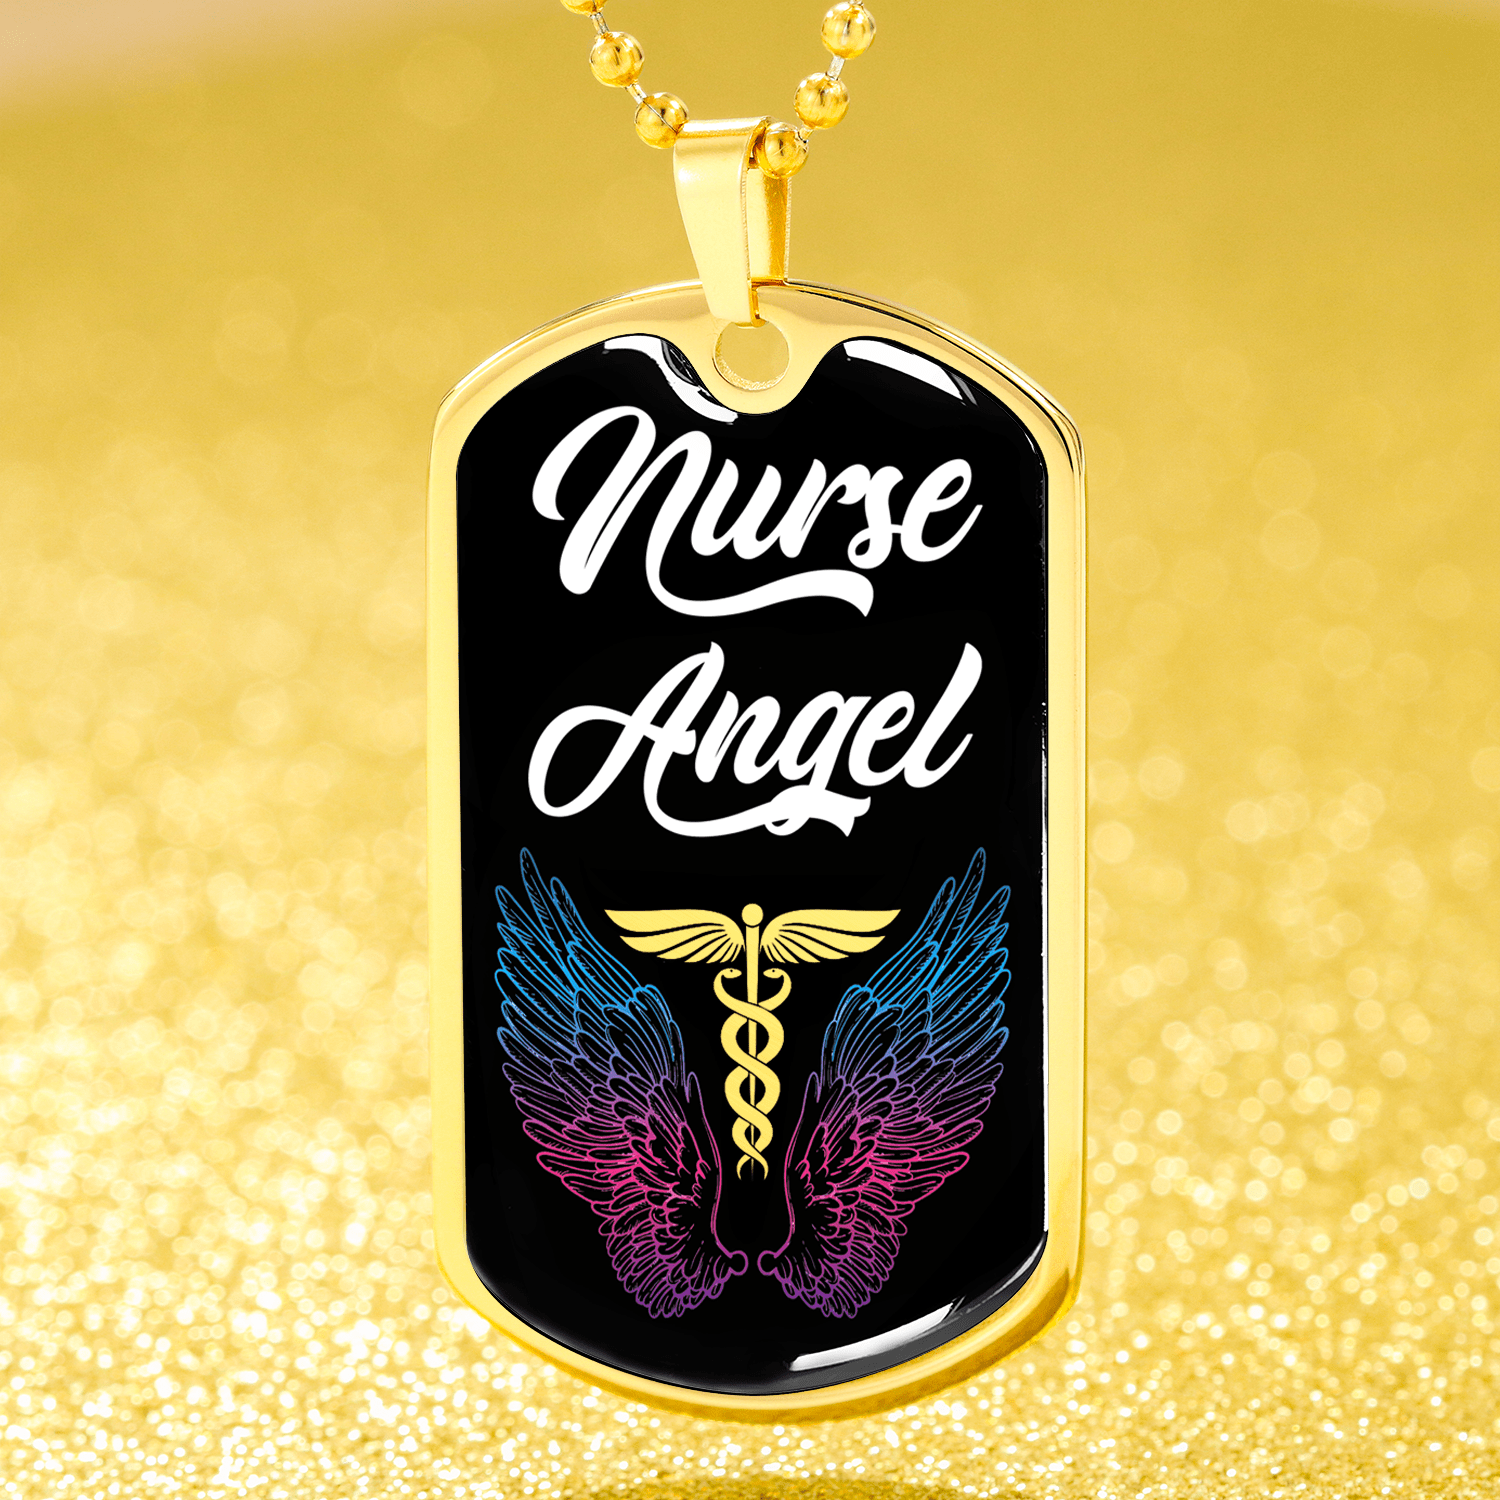 Nurse Angel Caduceus Necklace Stainless Steel or 18k Gold Dog Tag 24" - Express Your Love Gifts